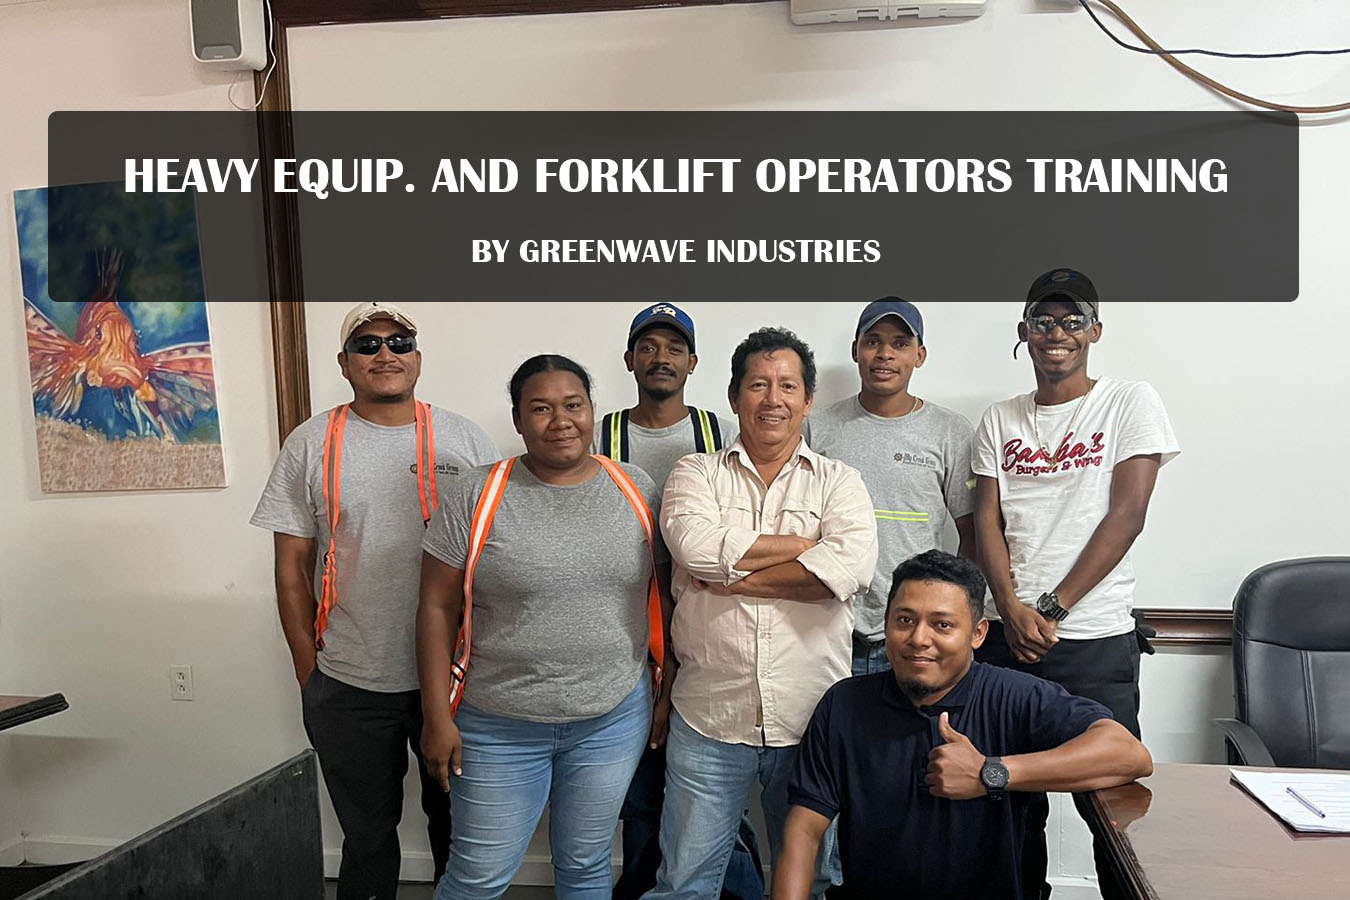 Heavy Equipment and Forklift Operators Training by GreenWave Industries